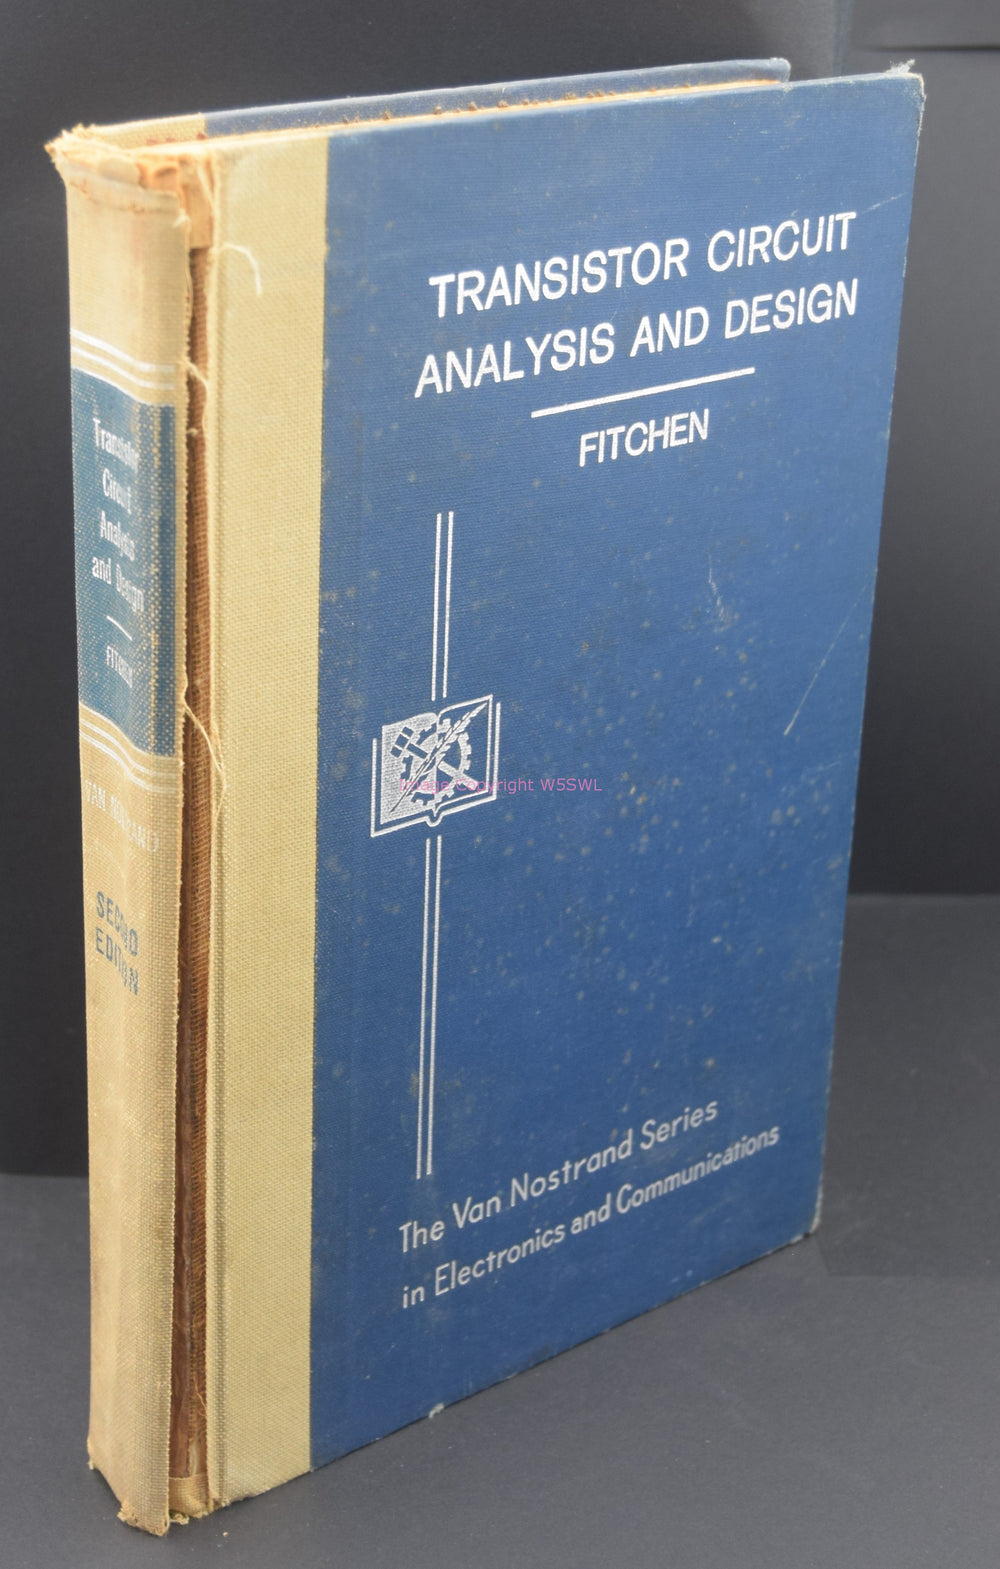 Transistor Circuit Analysis And Design by Fitchen 2nd Edition - Dave's Hobby Shop by W5SWL